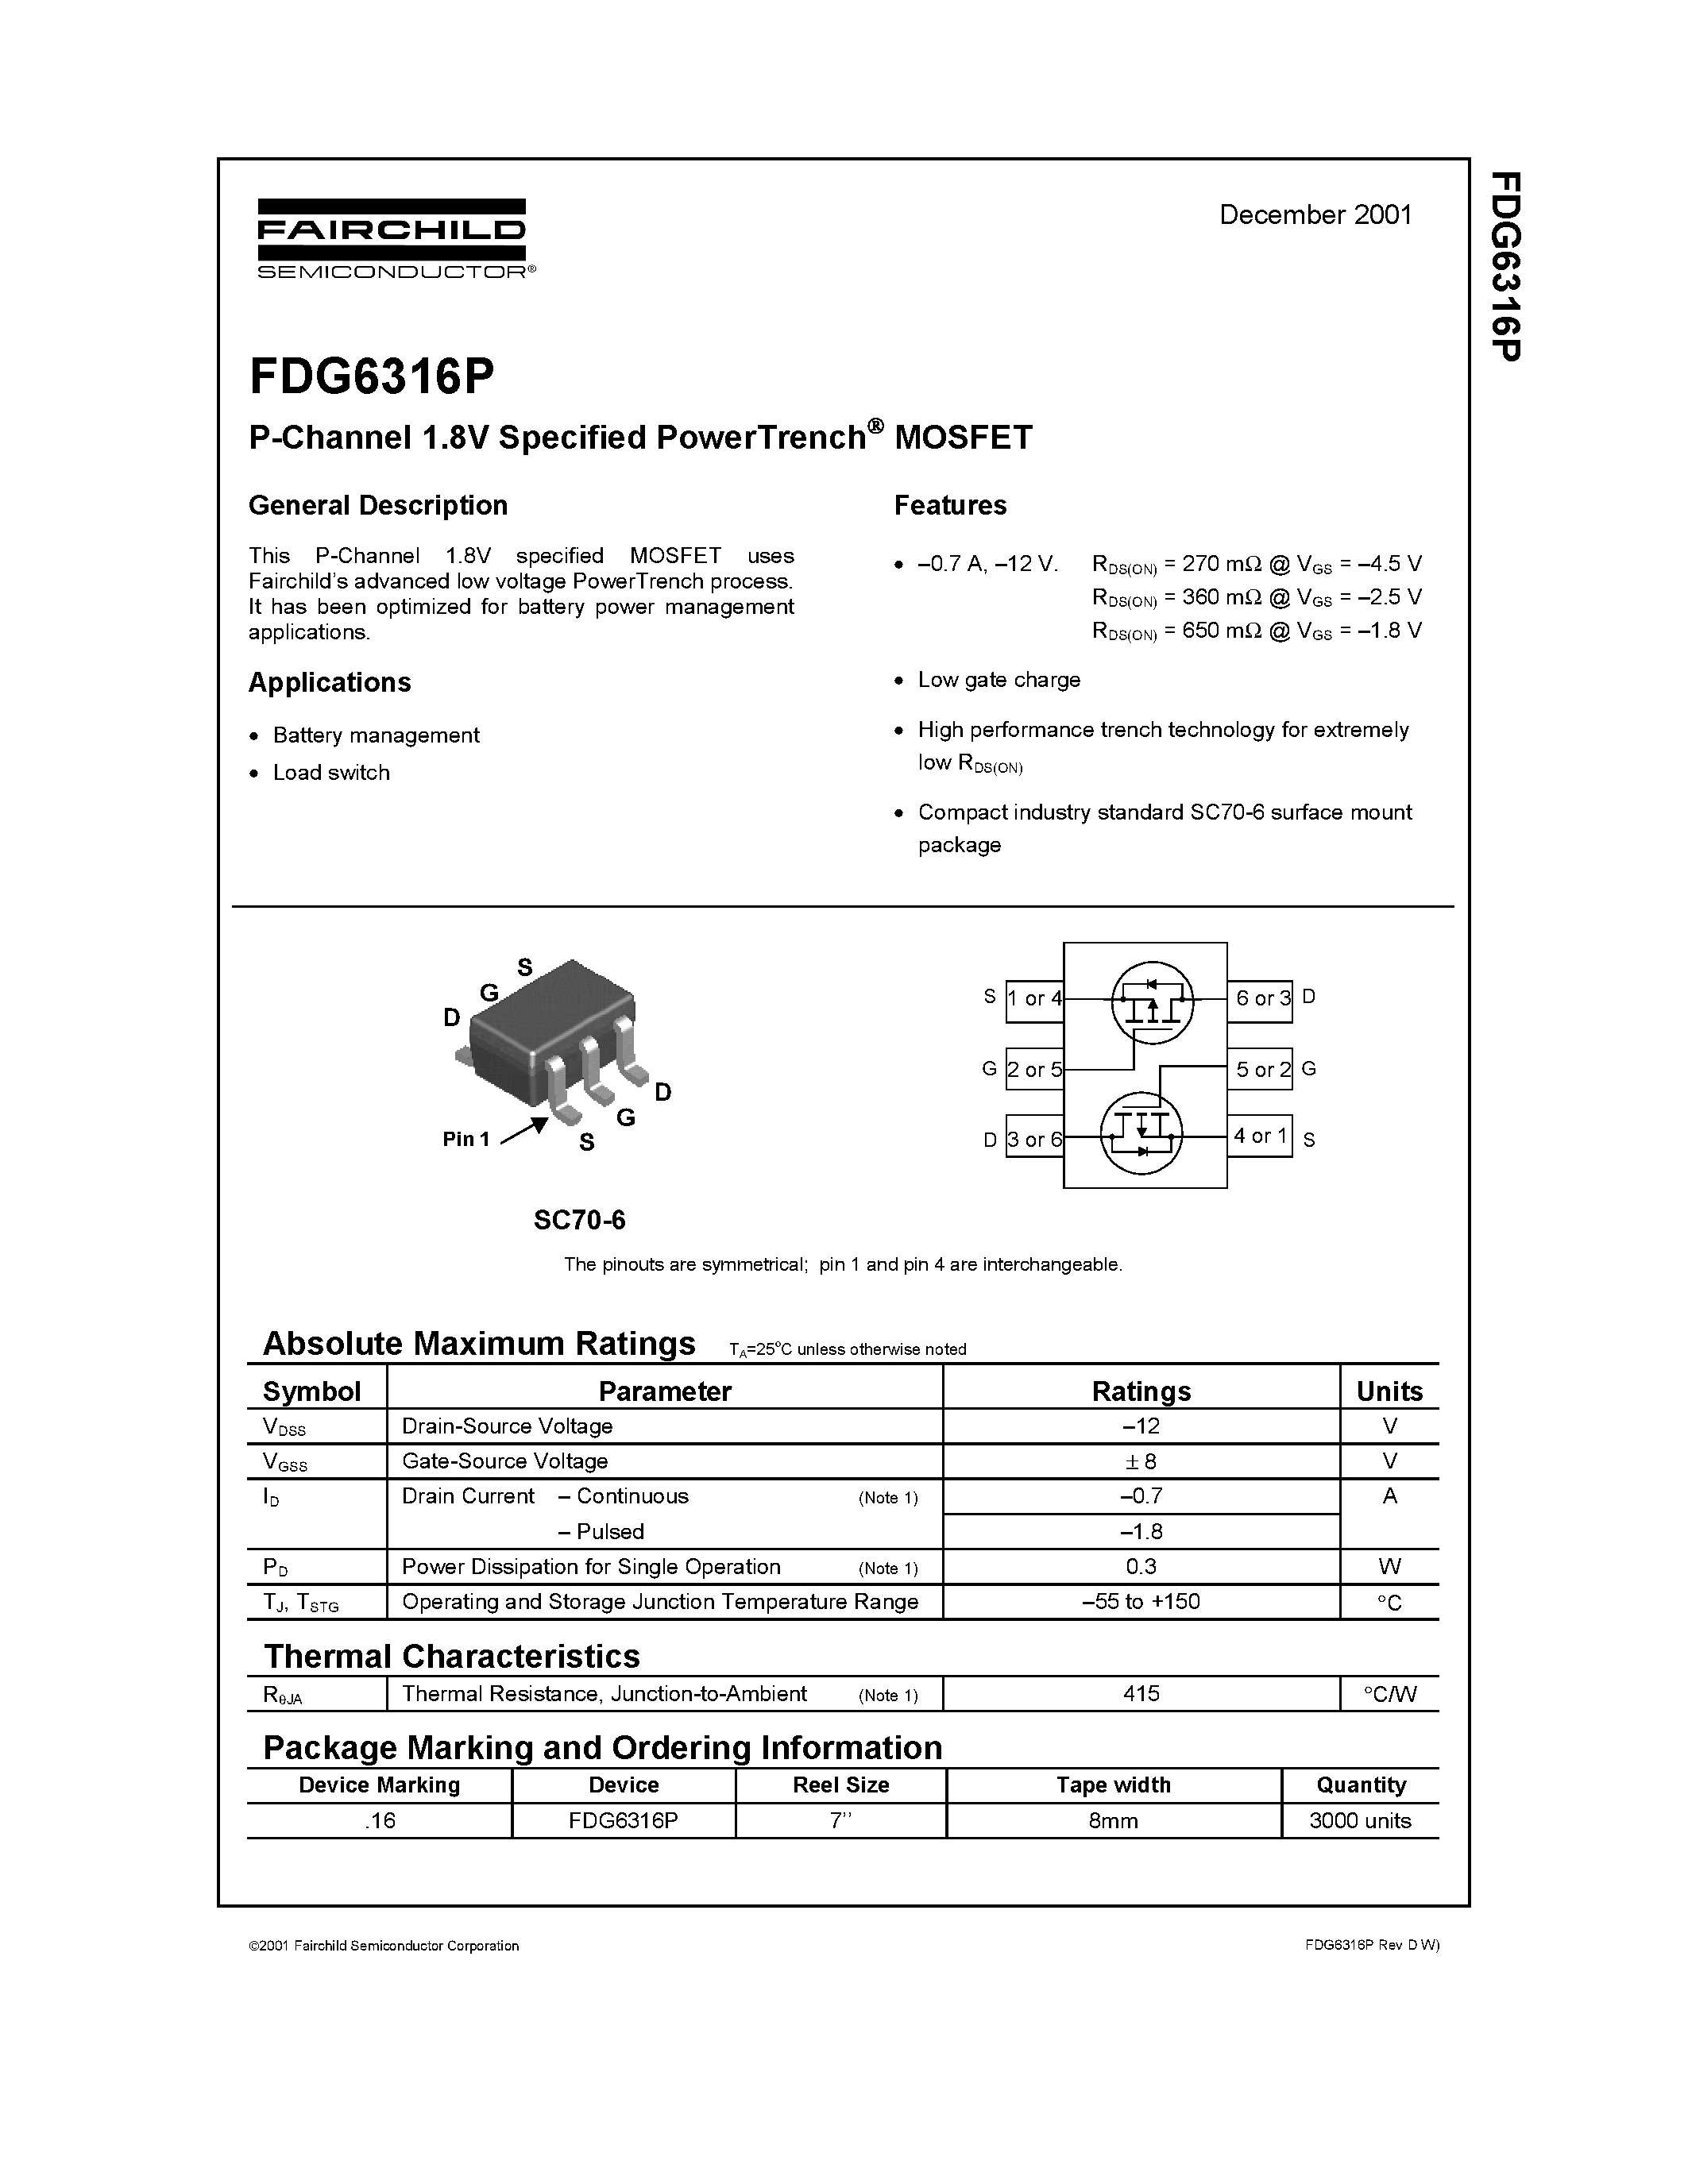 Даташит FDG6316 - P-Channel 1.8V Specified PowerTrench MOSFET страница 1